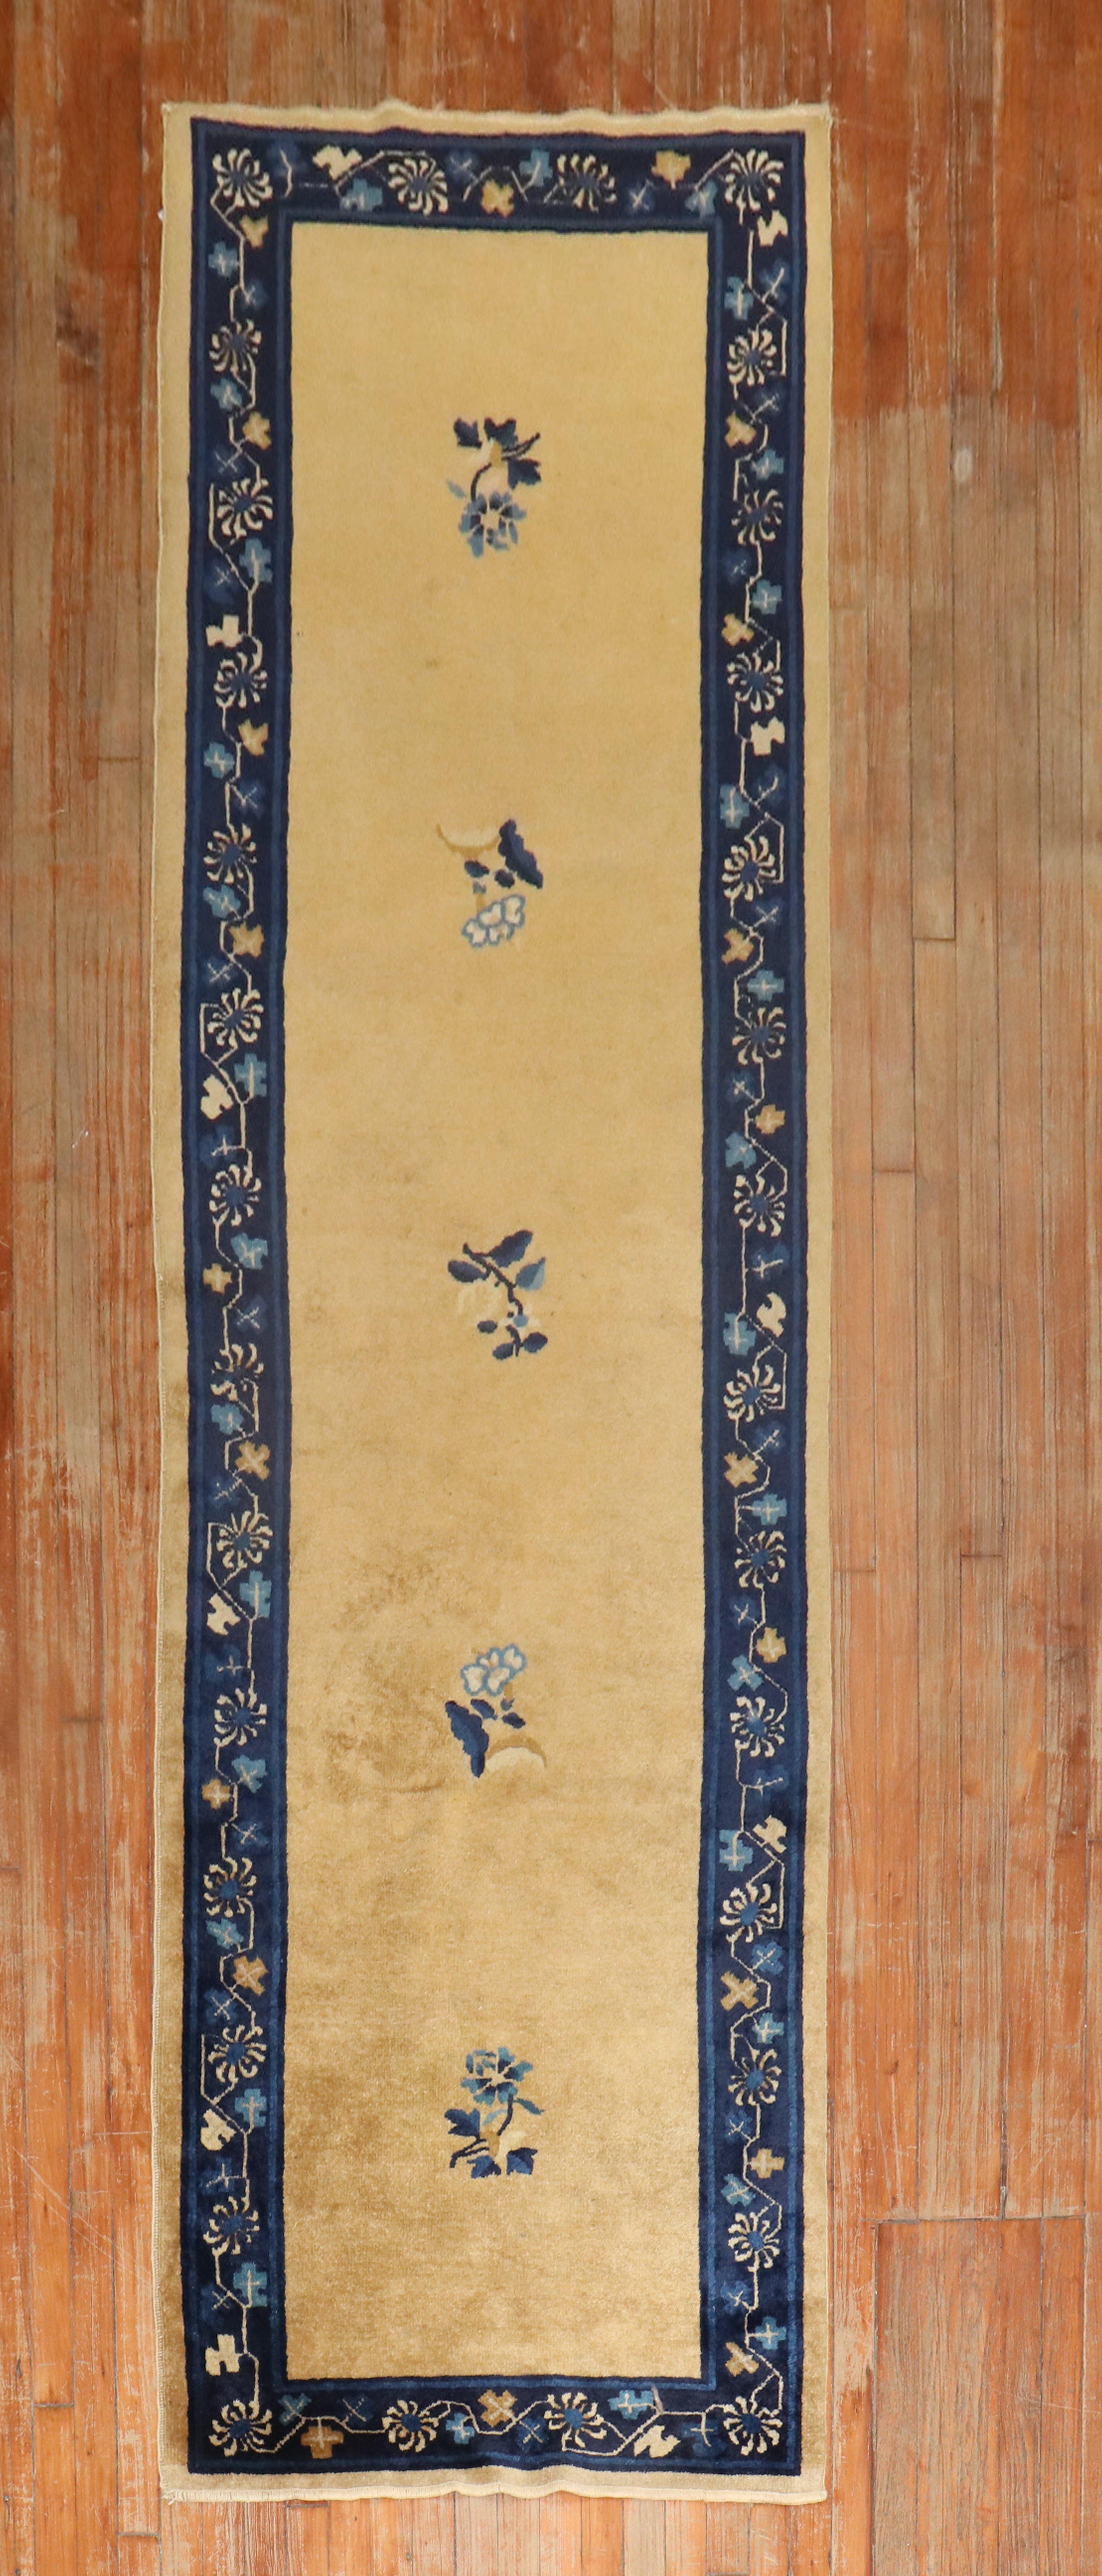 Beautiful Chinese Art Deco floral full pile condition runner in mustard and navy

Measures: 3' x 10'7